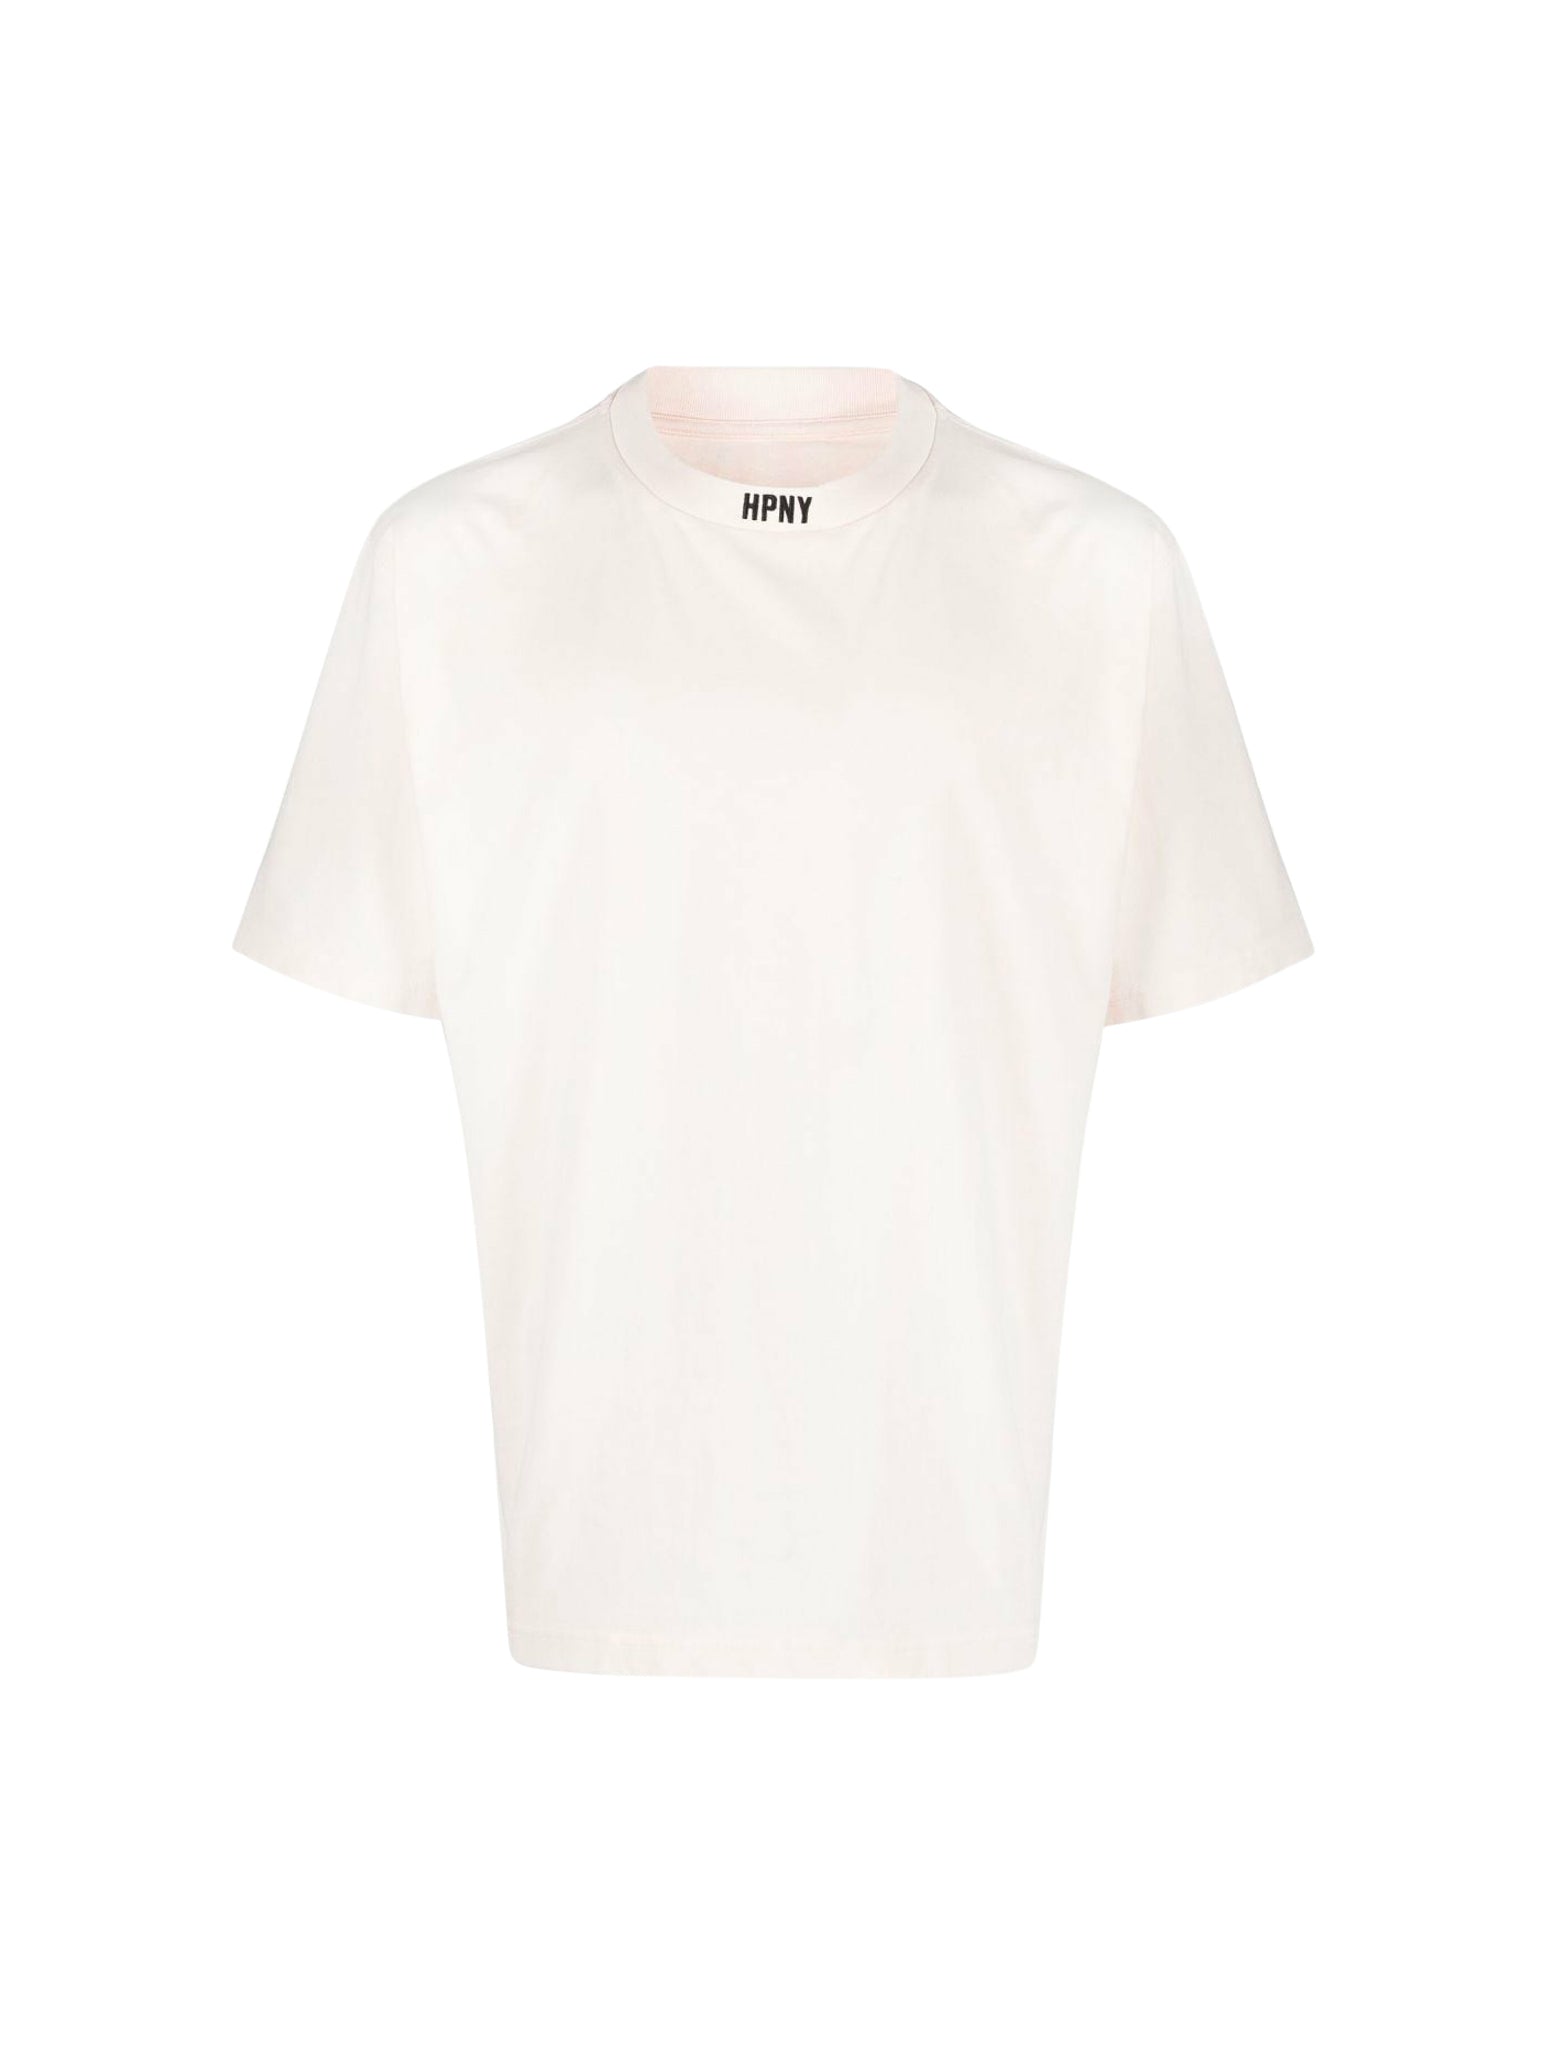 HPNY logo-embroidered T-shirt